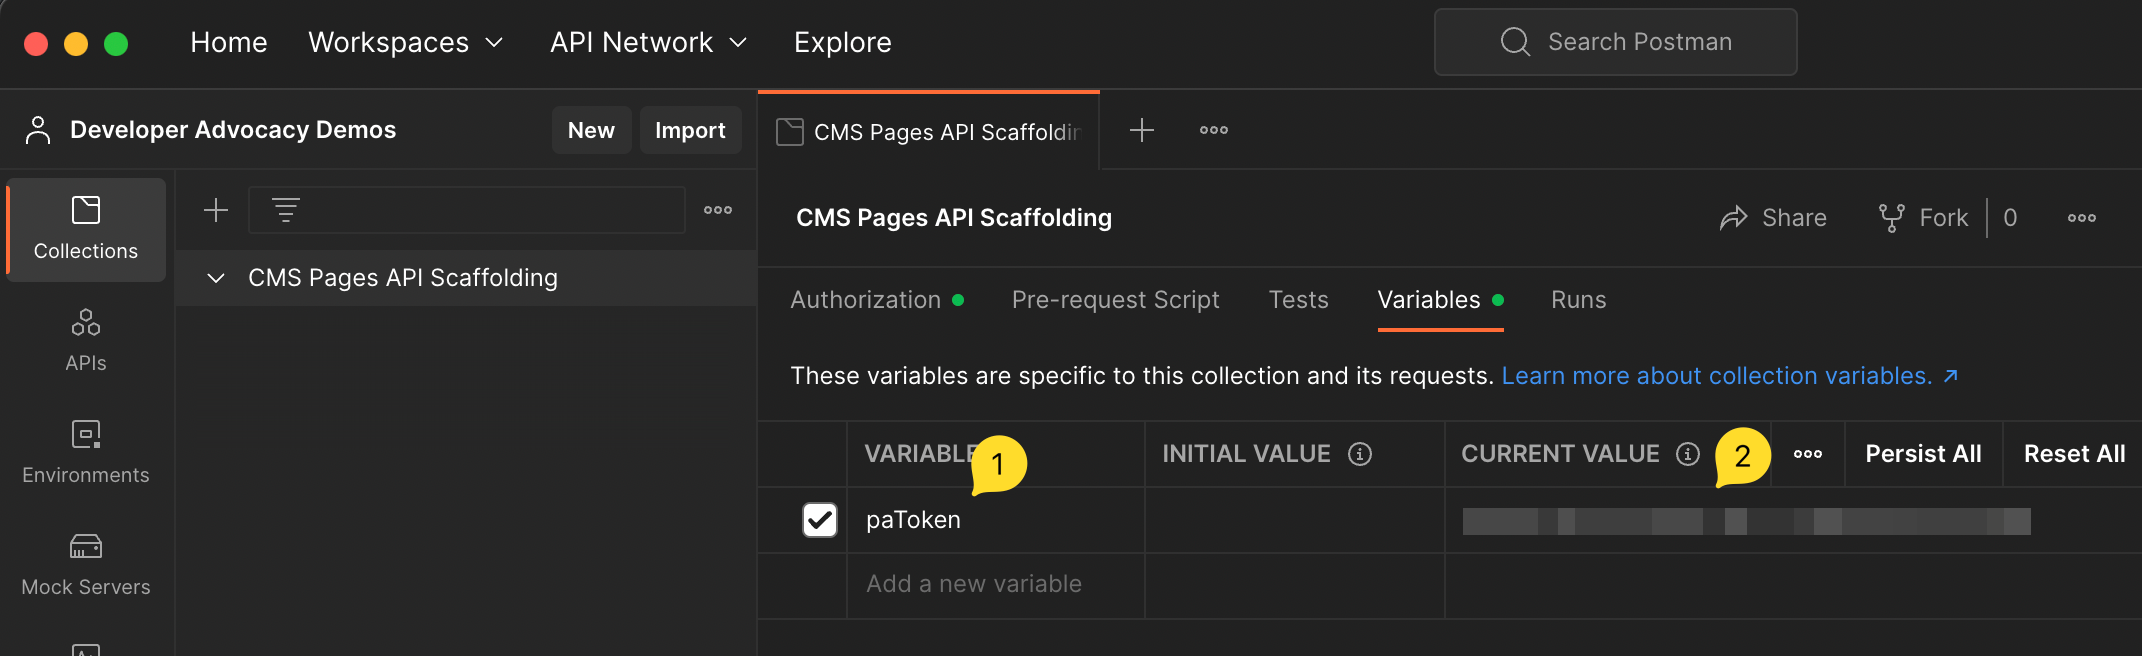 Creating variables in a Postman collection